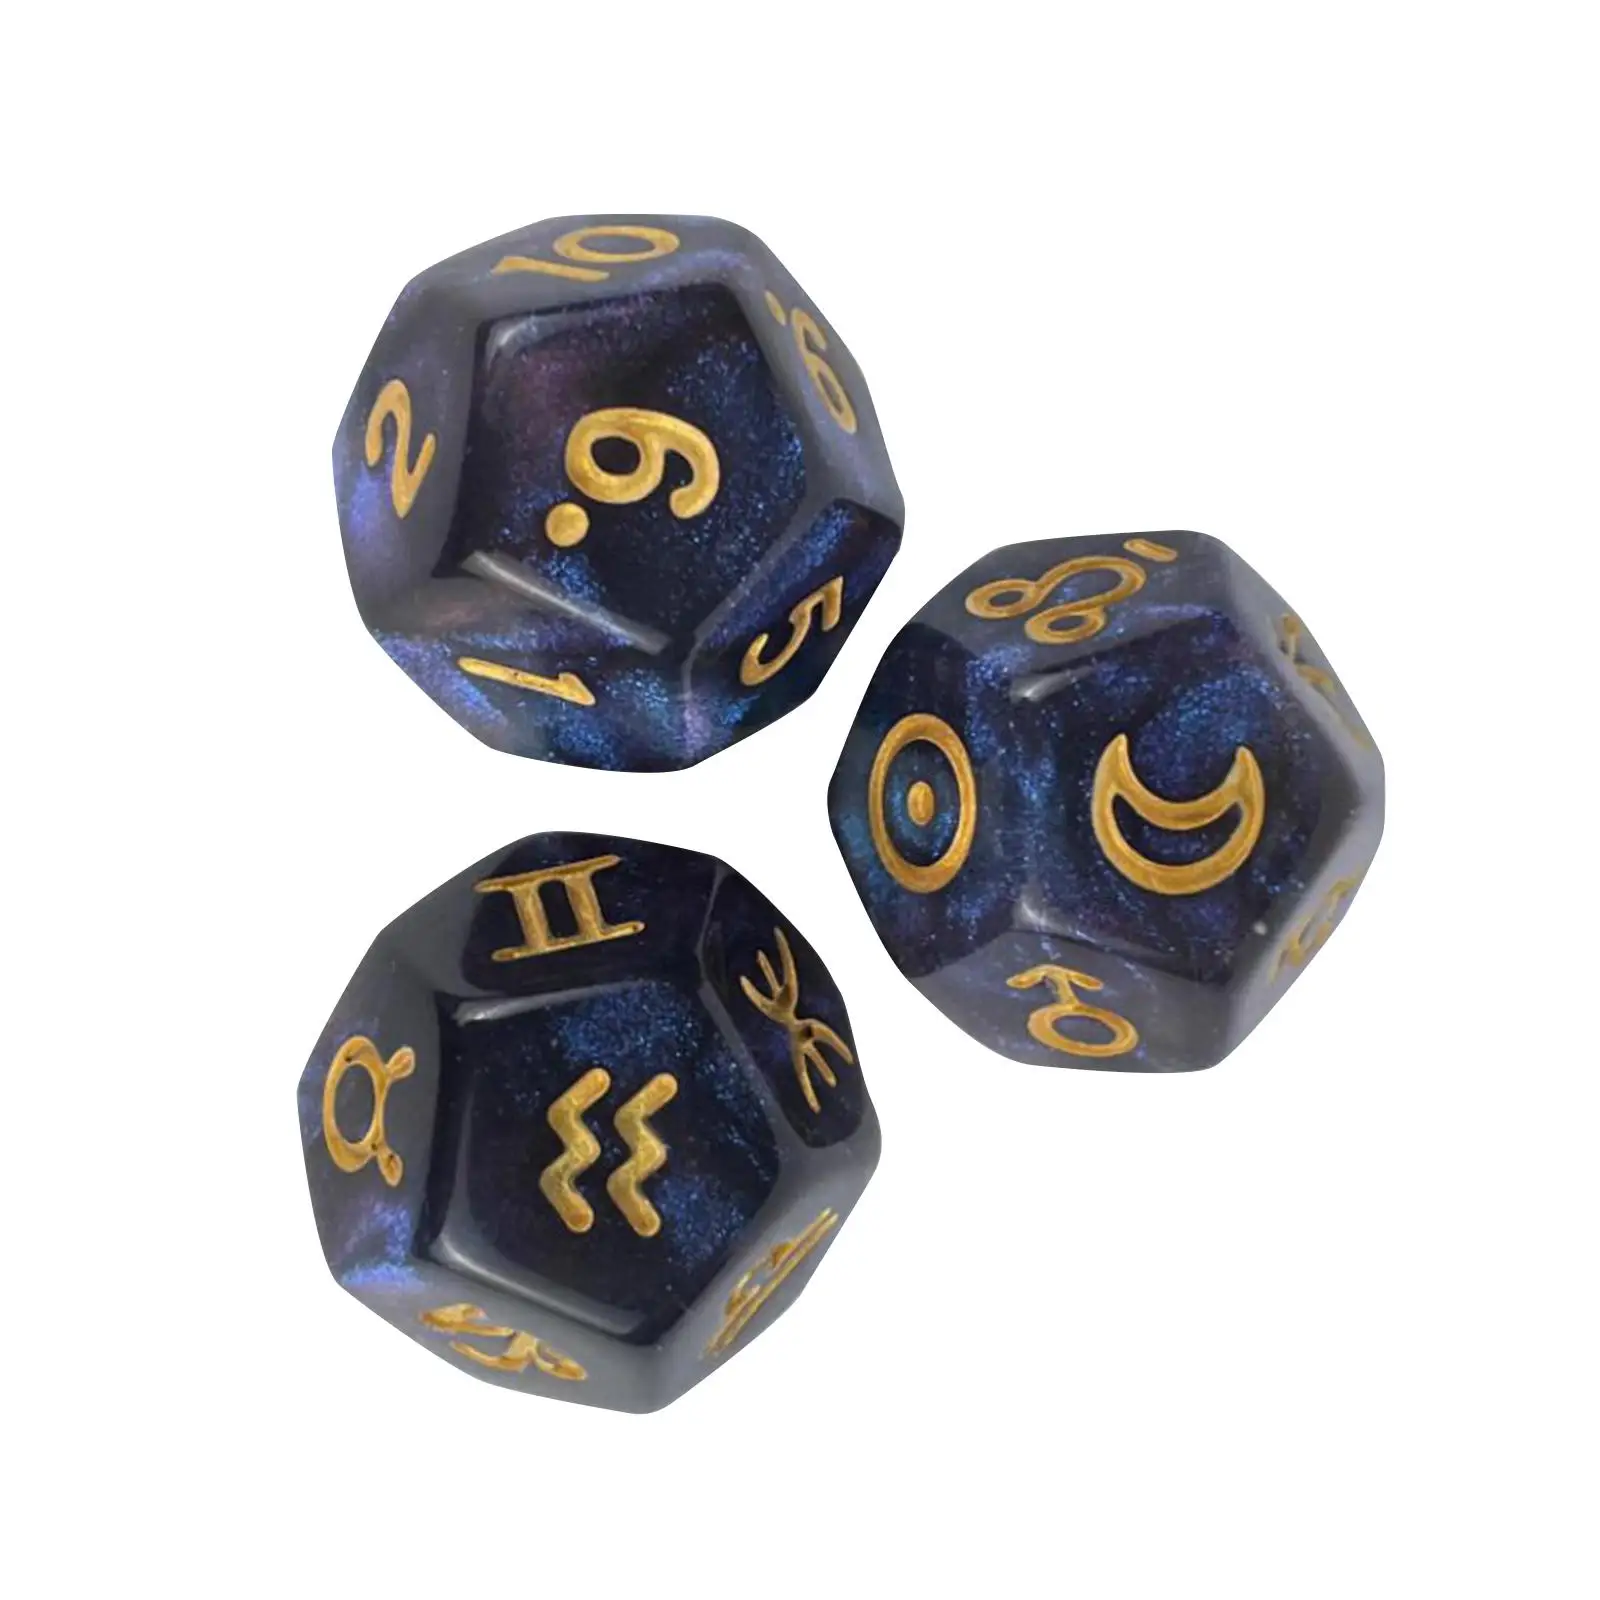 3x Tarot Cards Dice Entertainment Toys Constellation Sign Dice D12 Astrology Dice for Party Astro Divination Gaming Accessory